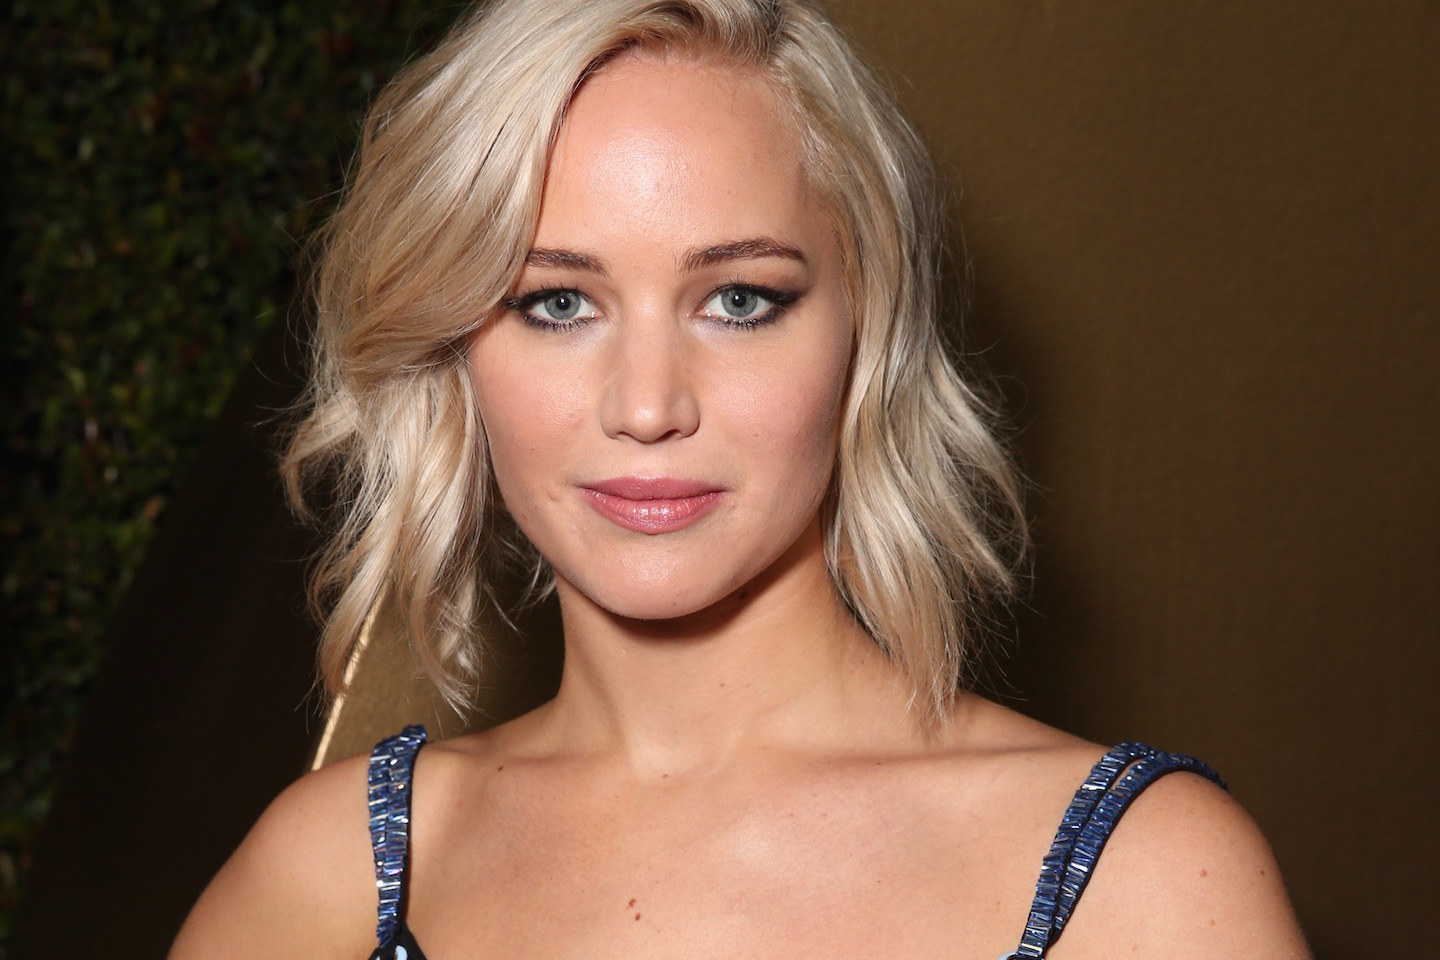 20 Photos of Jennifer Lawrence That Will Make You Say